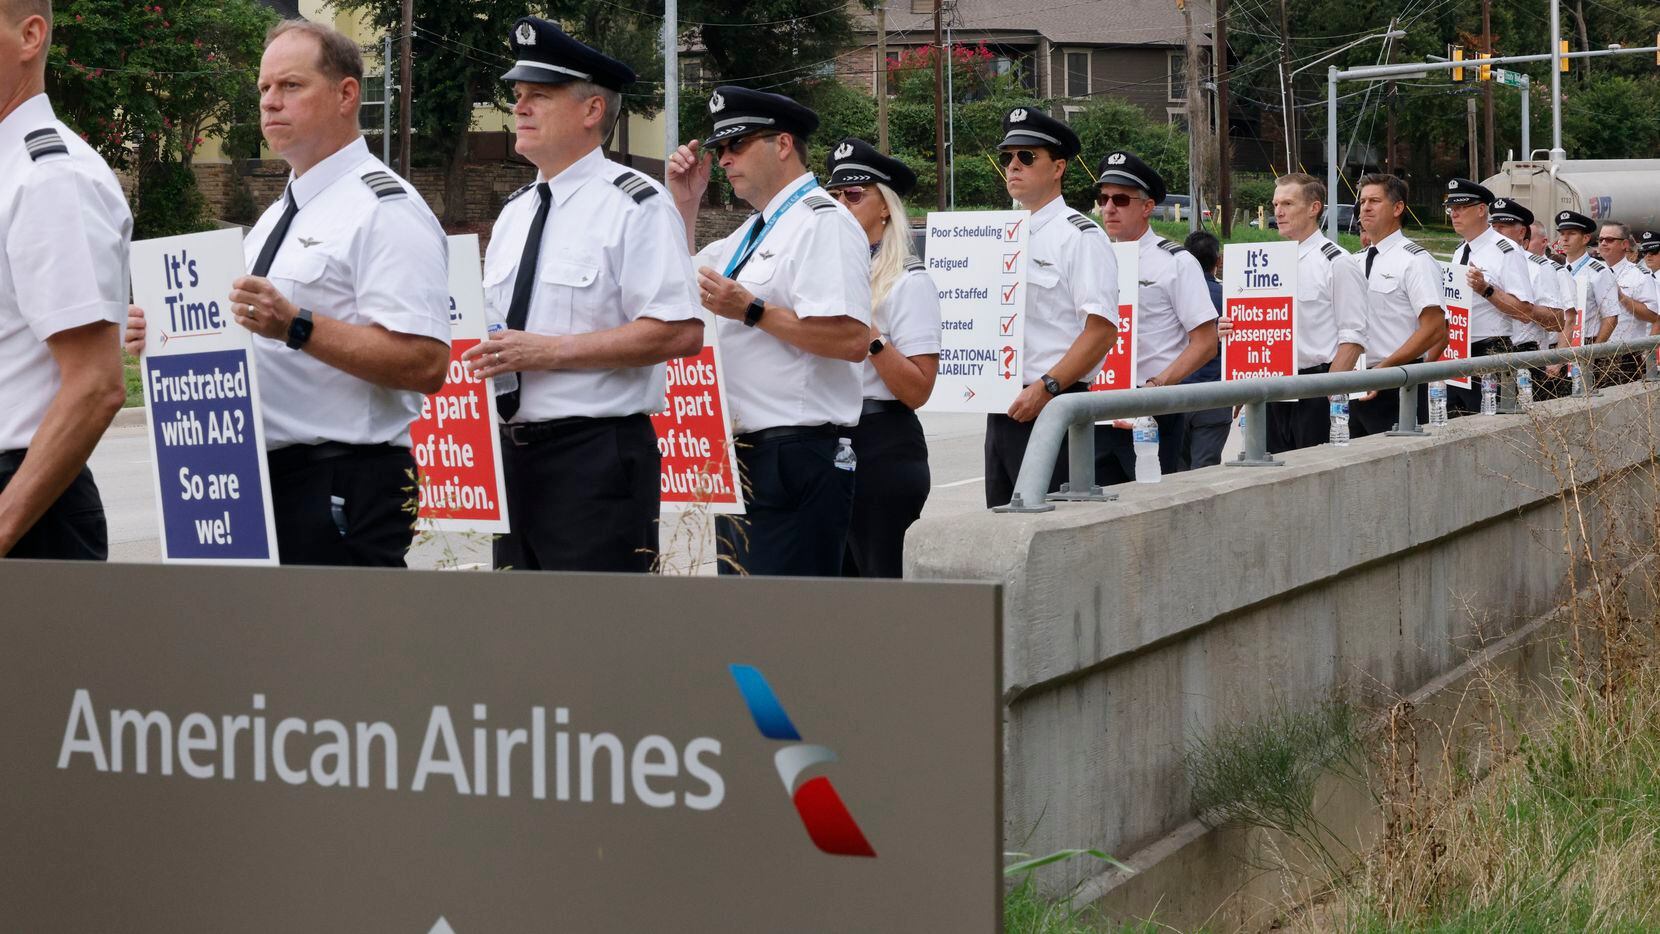 American Airlines offers pilots 20 raises over two years in new contract